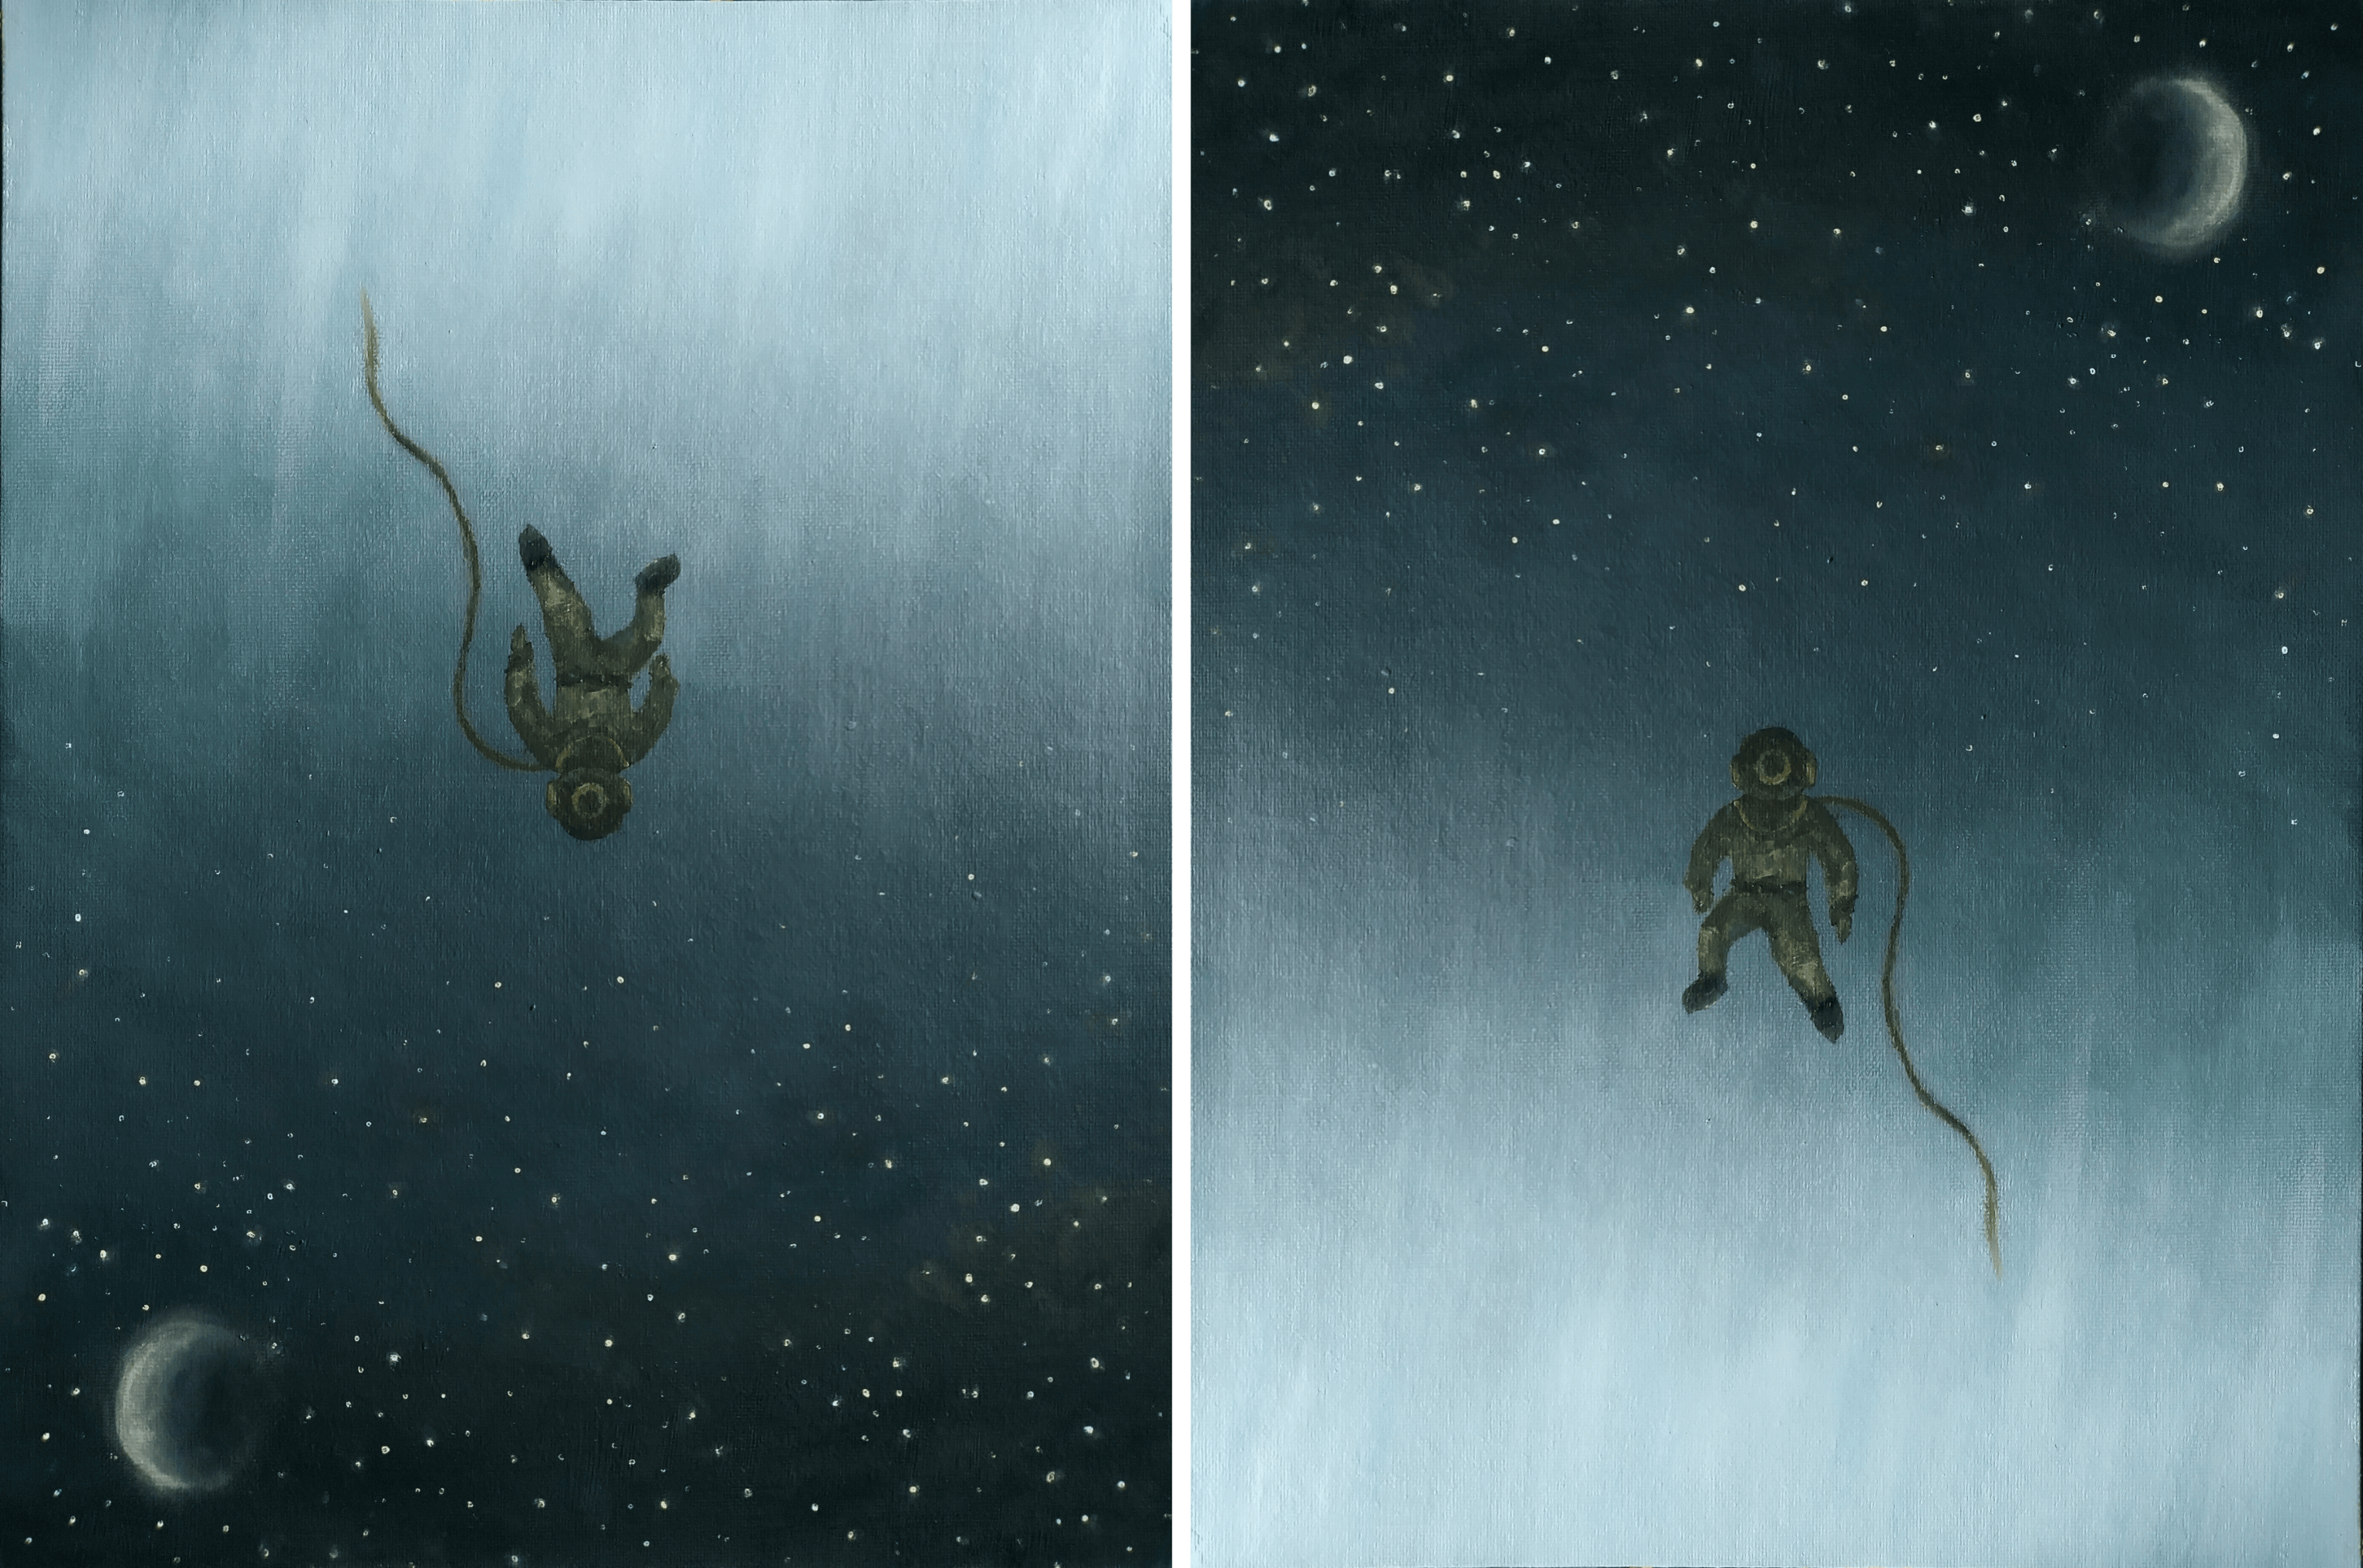 A 19th century diver in water that turns into a starry sky